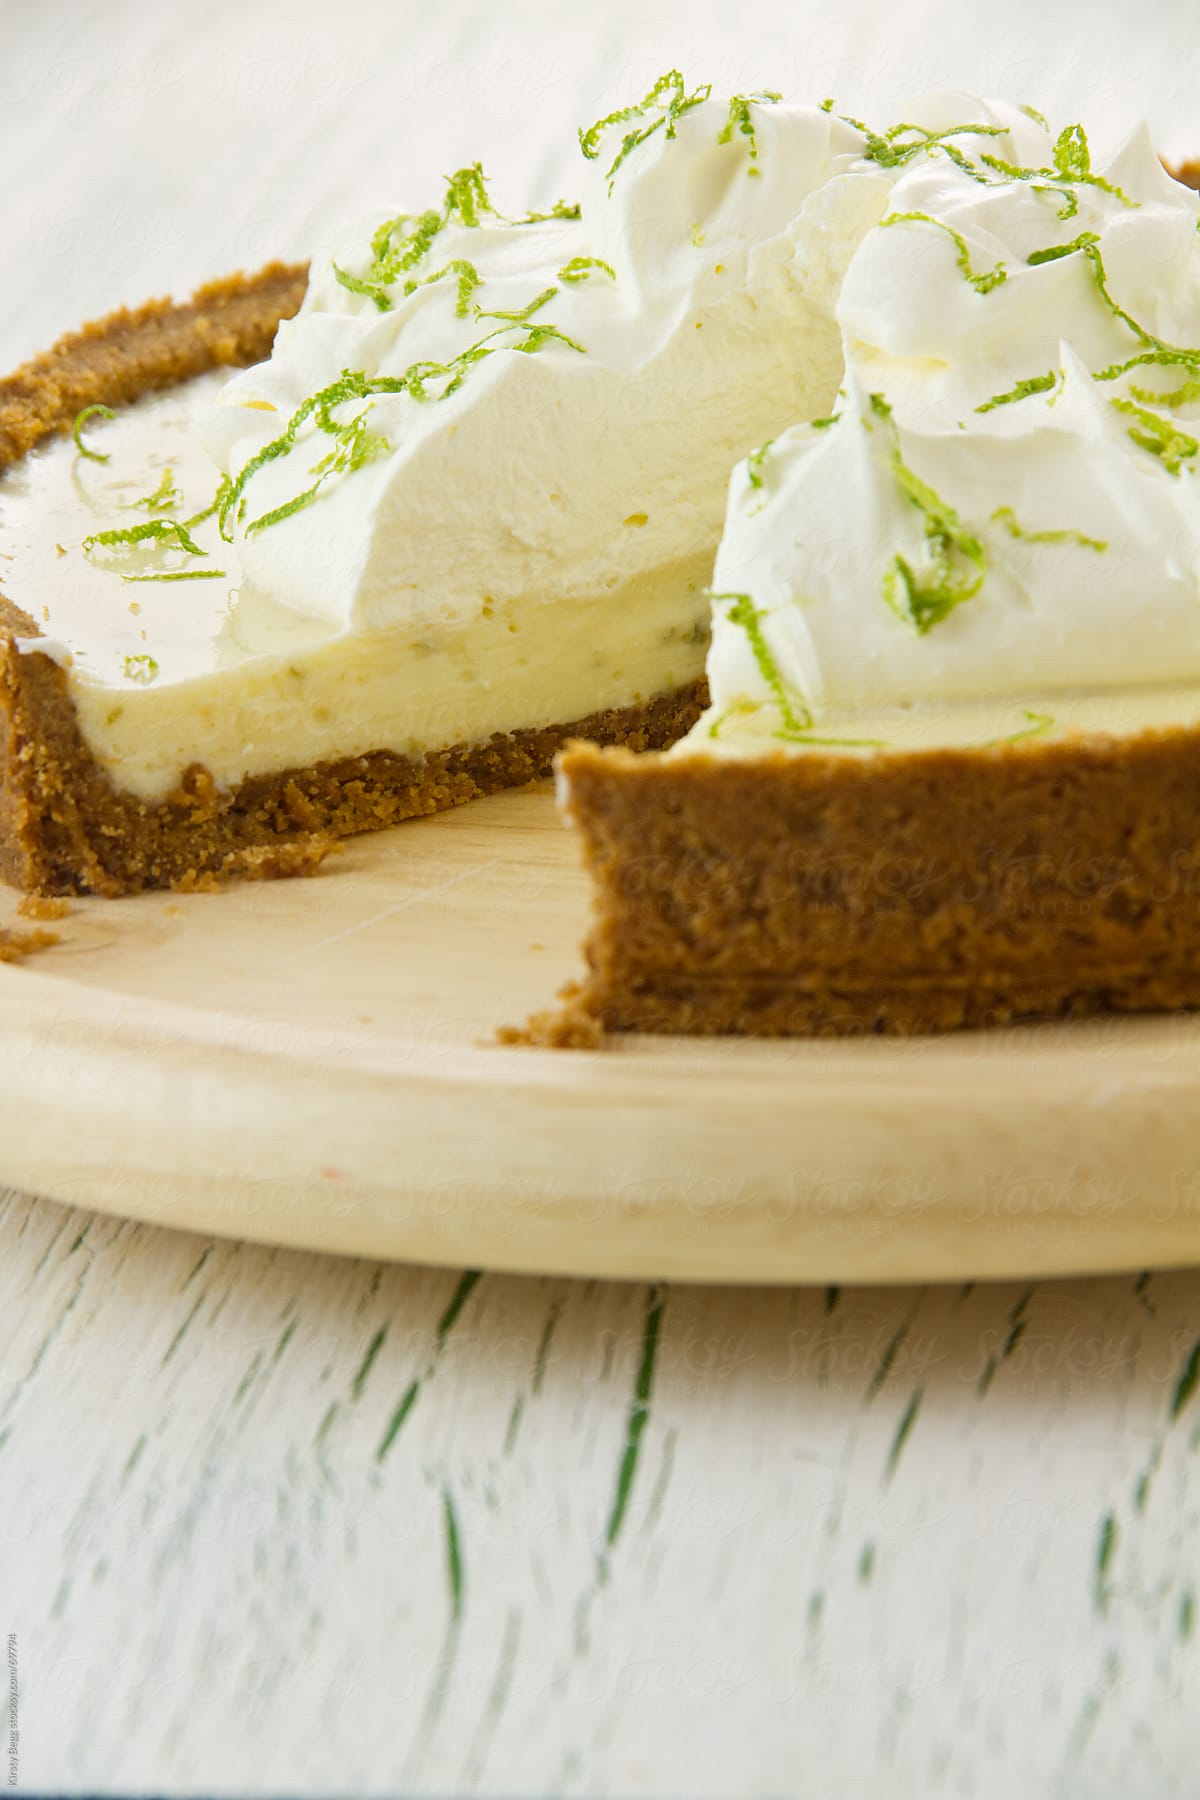 Key Lime Pie with cream, cross section